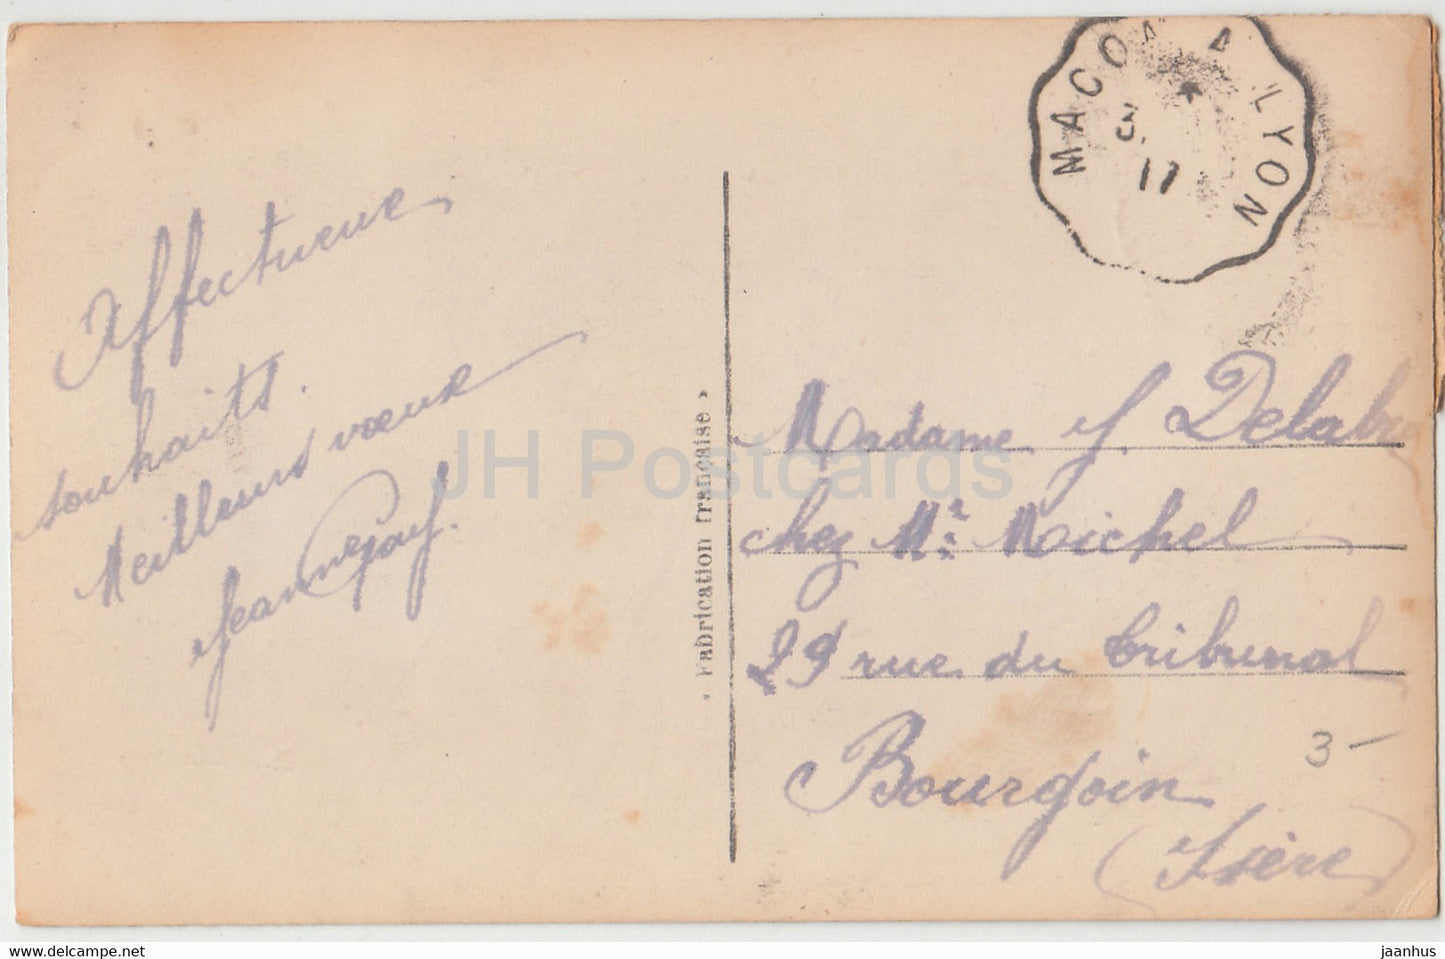 New Year Greeting Card - Bonne Annee - DIX 1090 - old postcard - 1917 - France - used